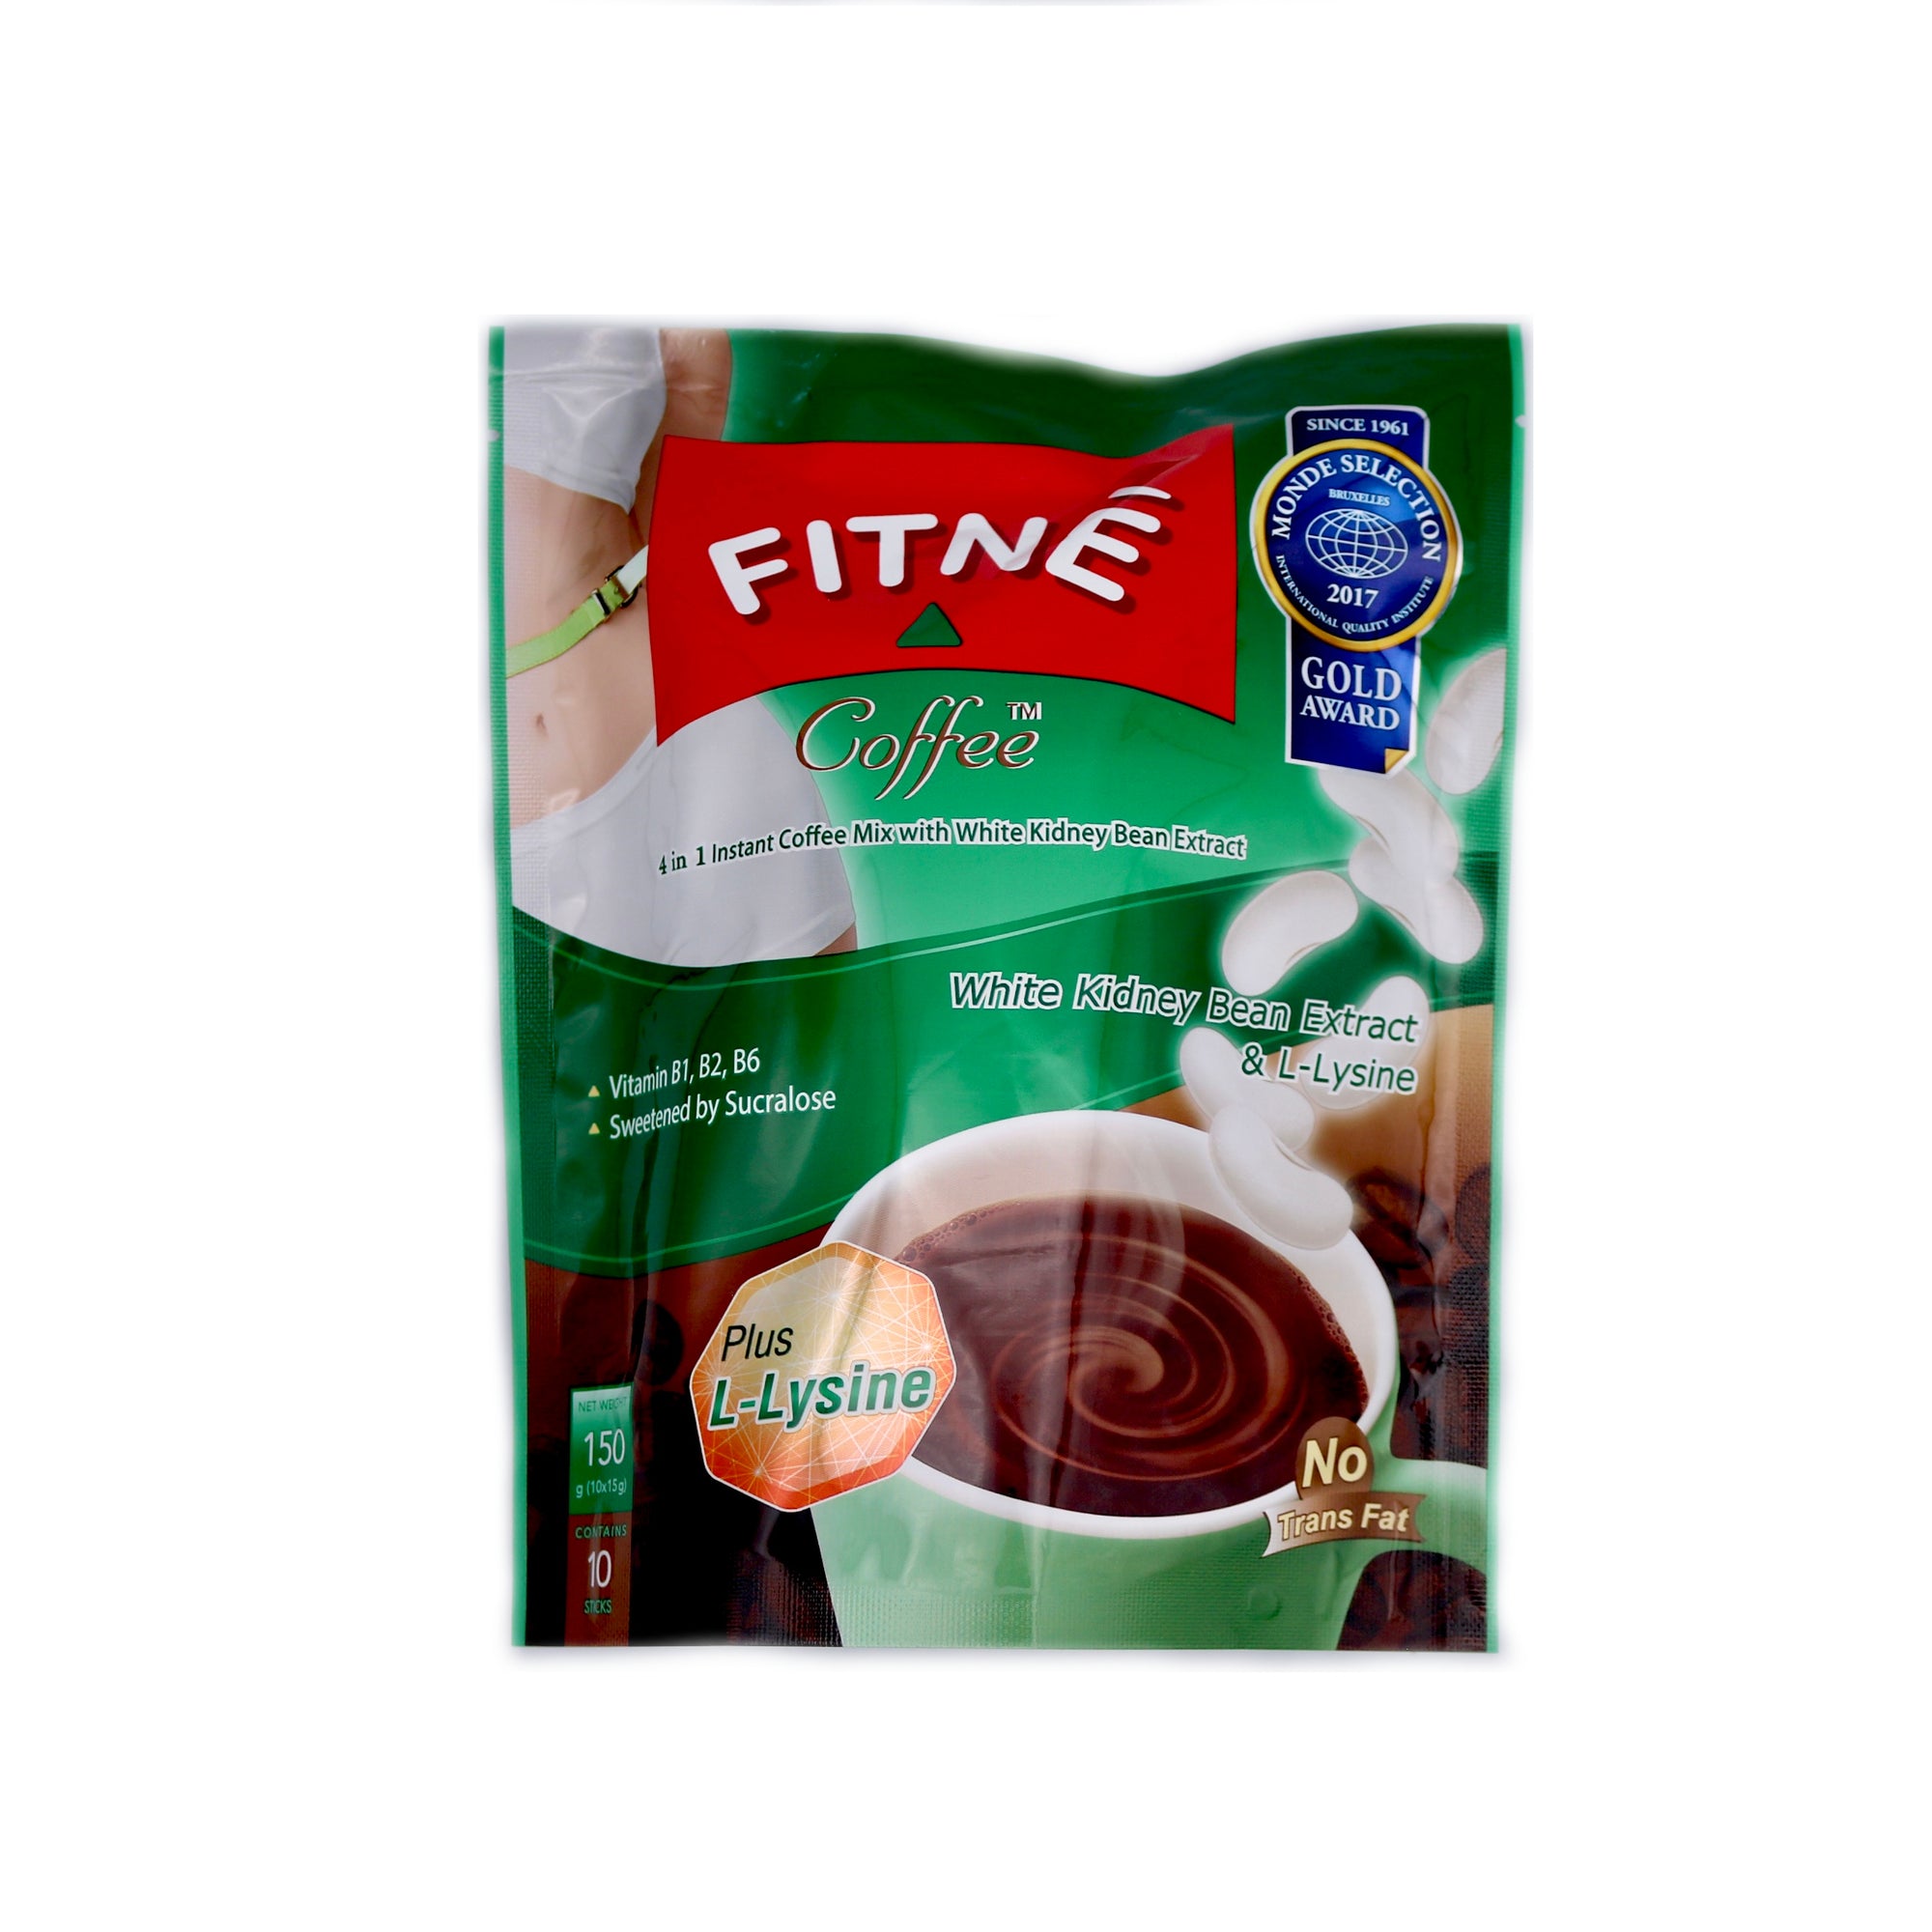 Fitne Herbal Infusion Green Tea Flavour 15 bags – Only Filipino